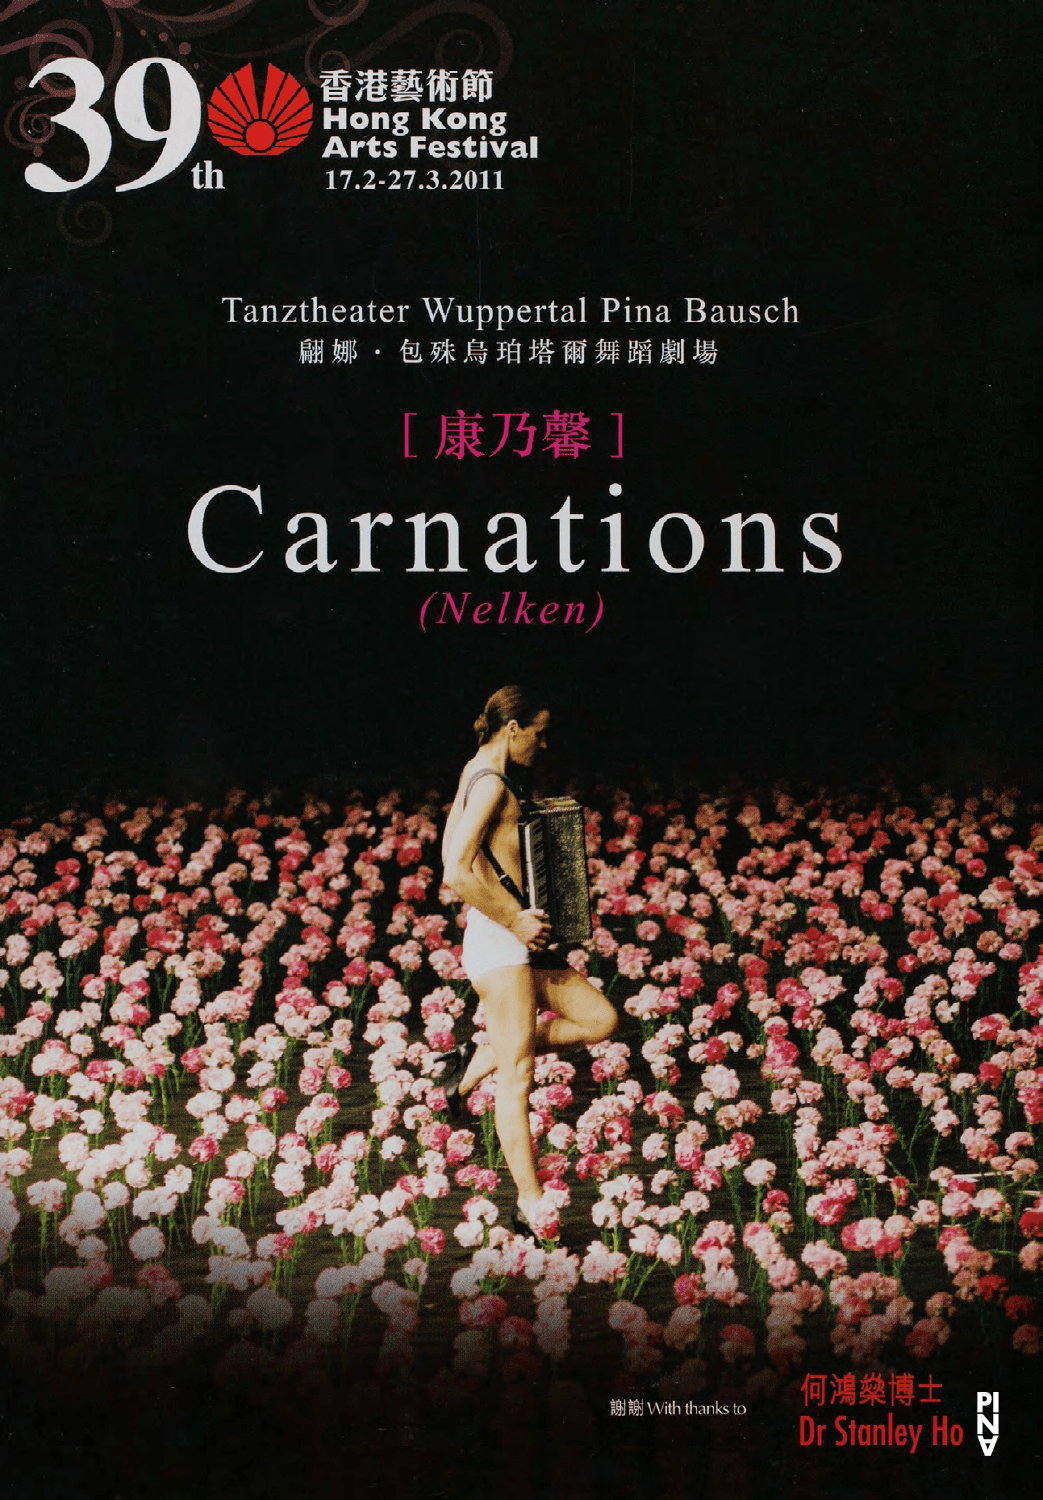 Booklet for “Nelken (Carnations)” by Pina Bausch with Tanztheater Wuppertal in in Hong Kong, 03/11/2011 – 03/13/2011